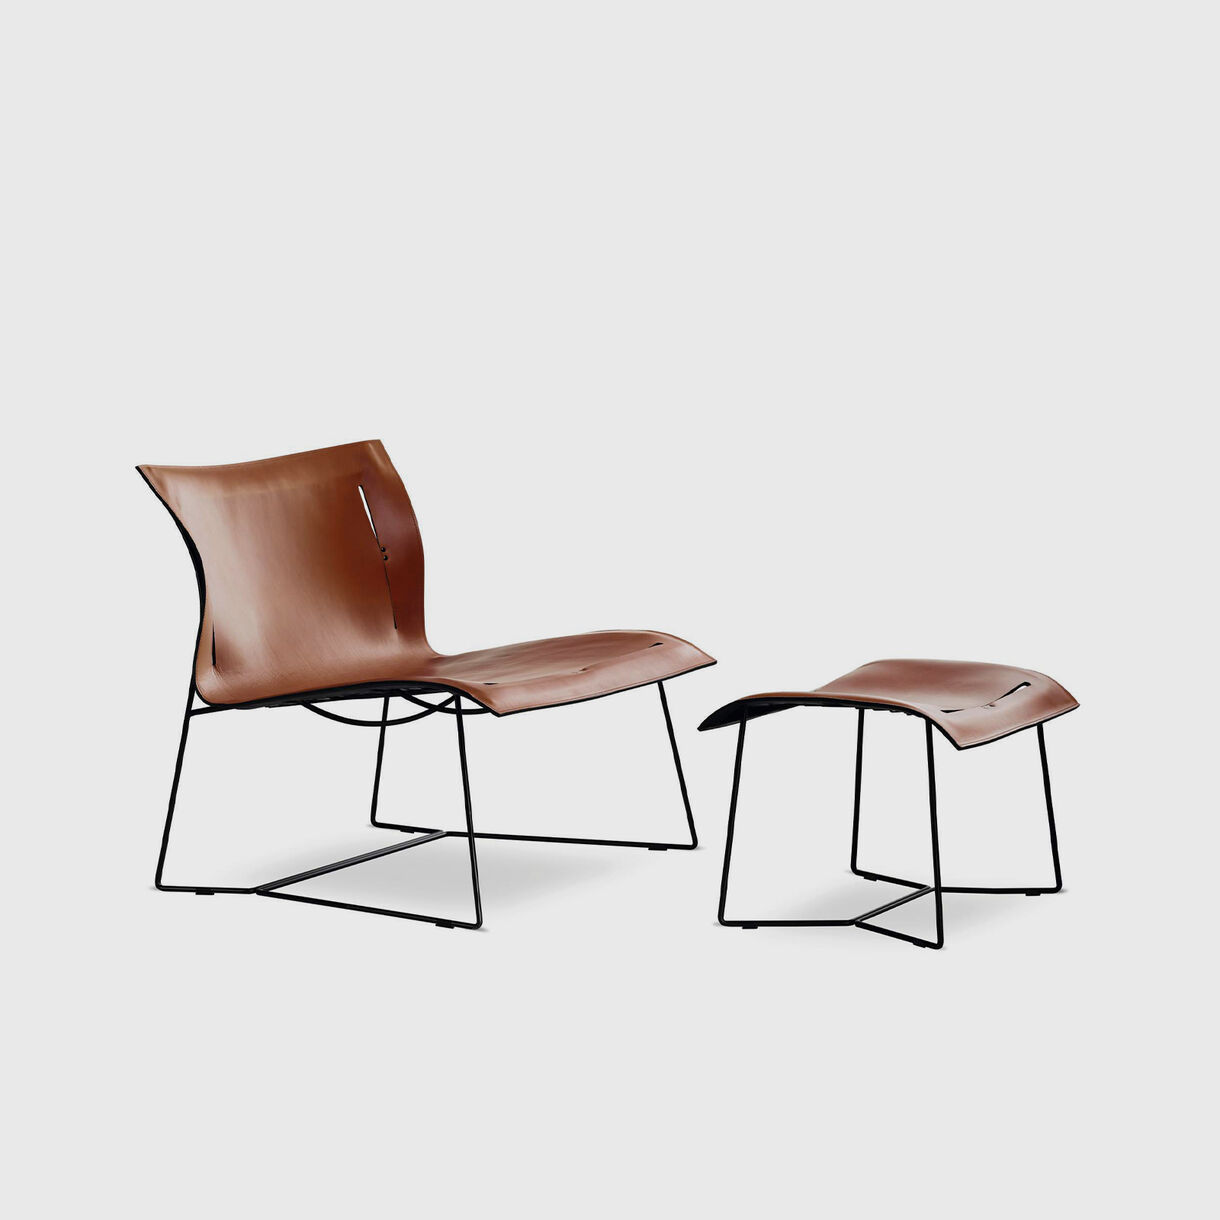 Cuoio Lounge Chair